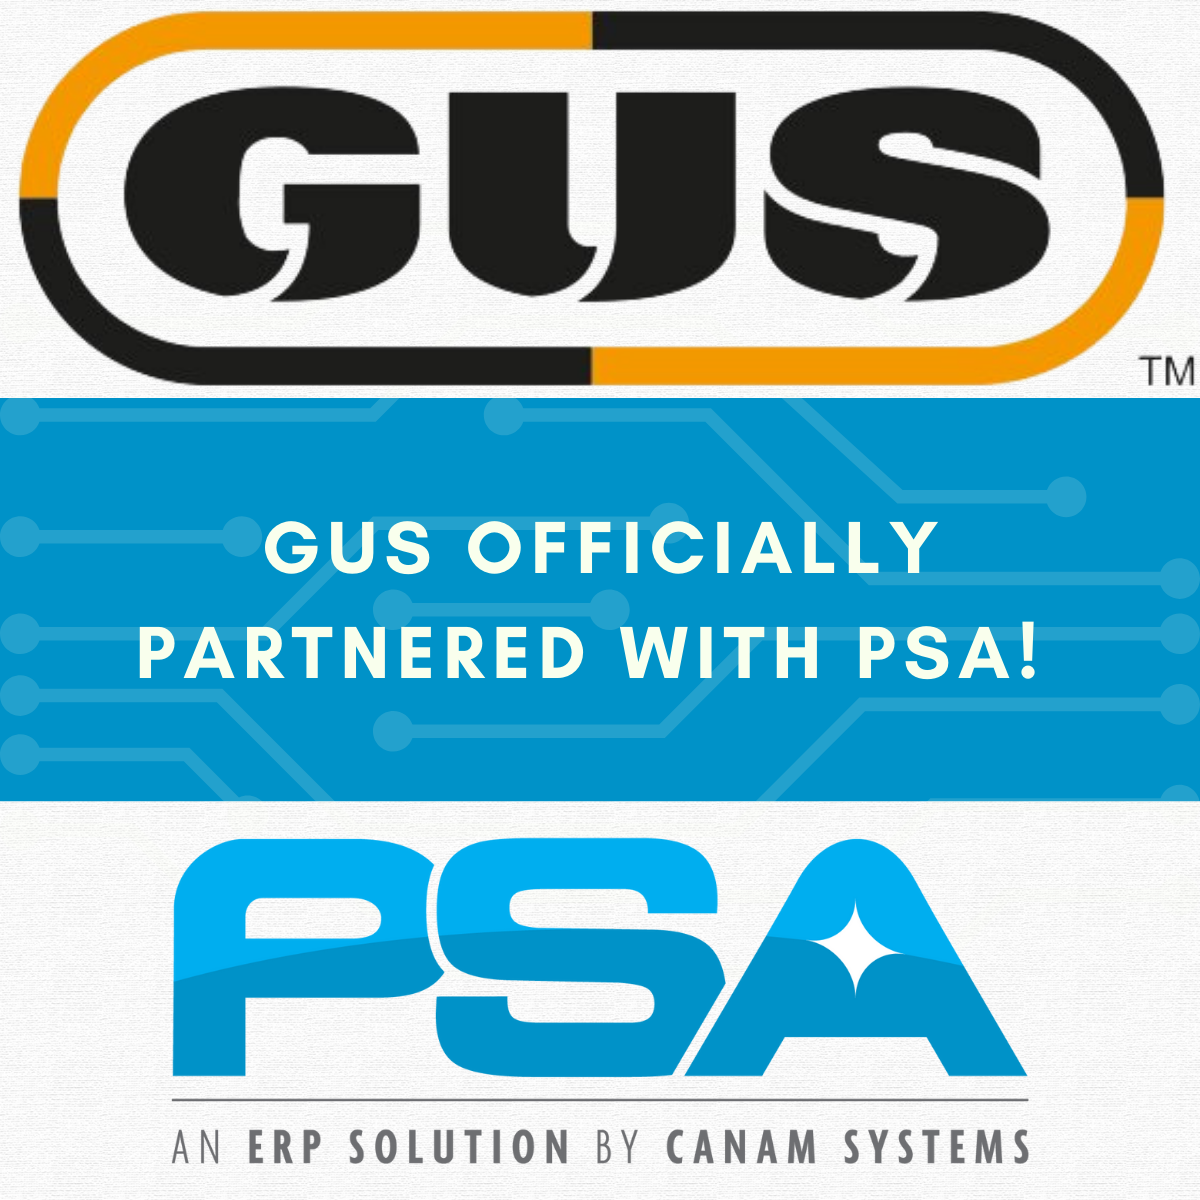 GUS has officially partnered with PSA!